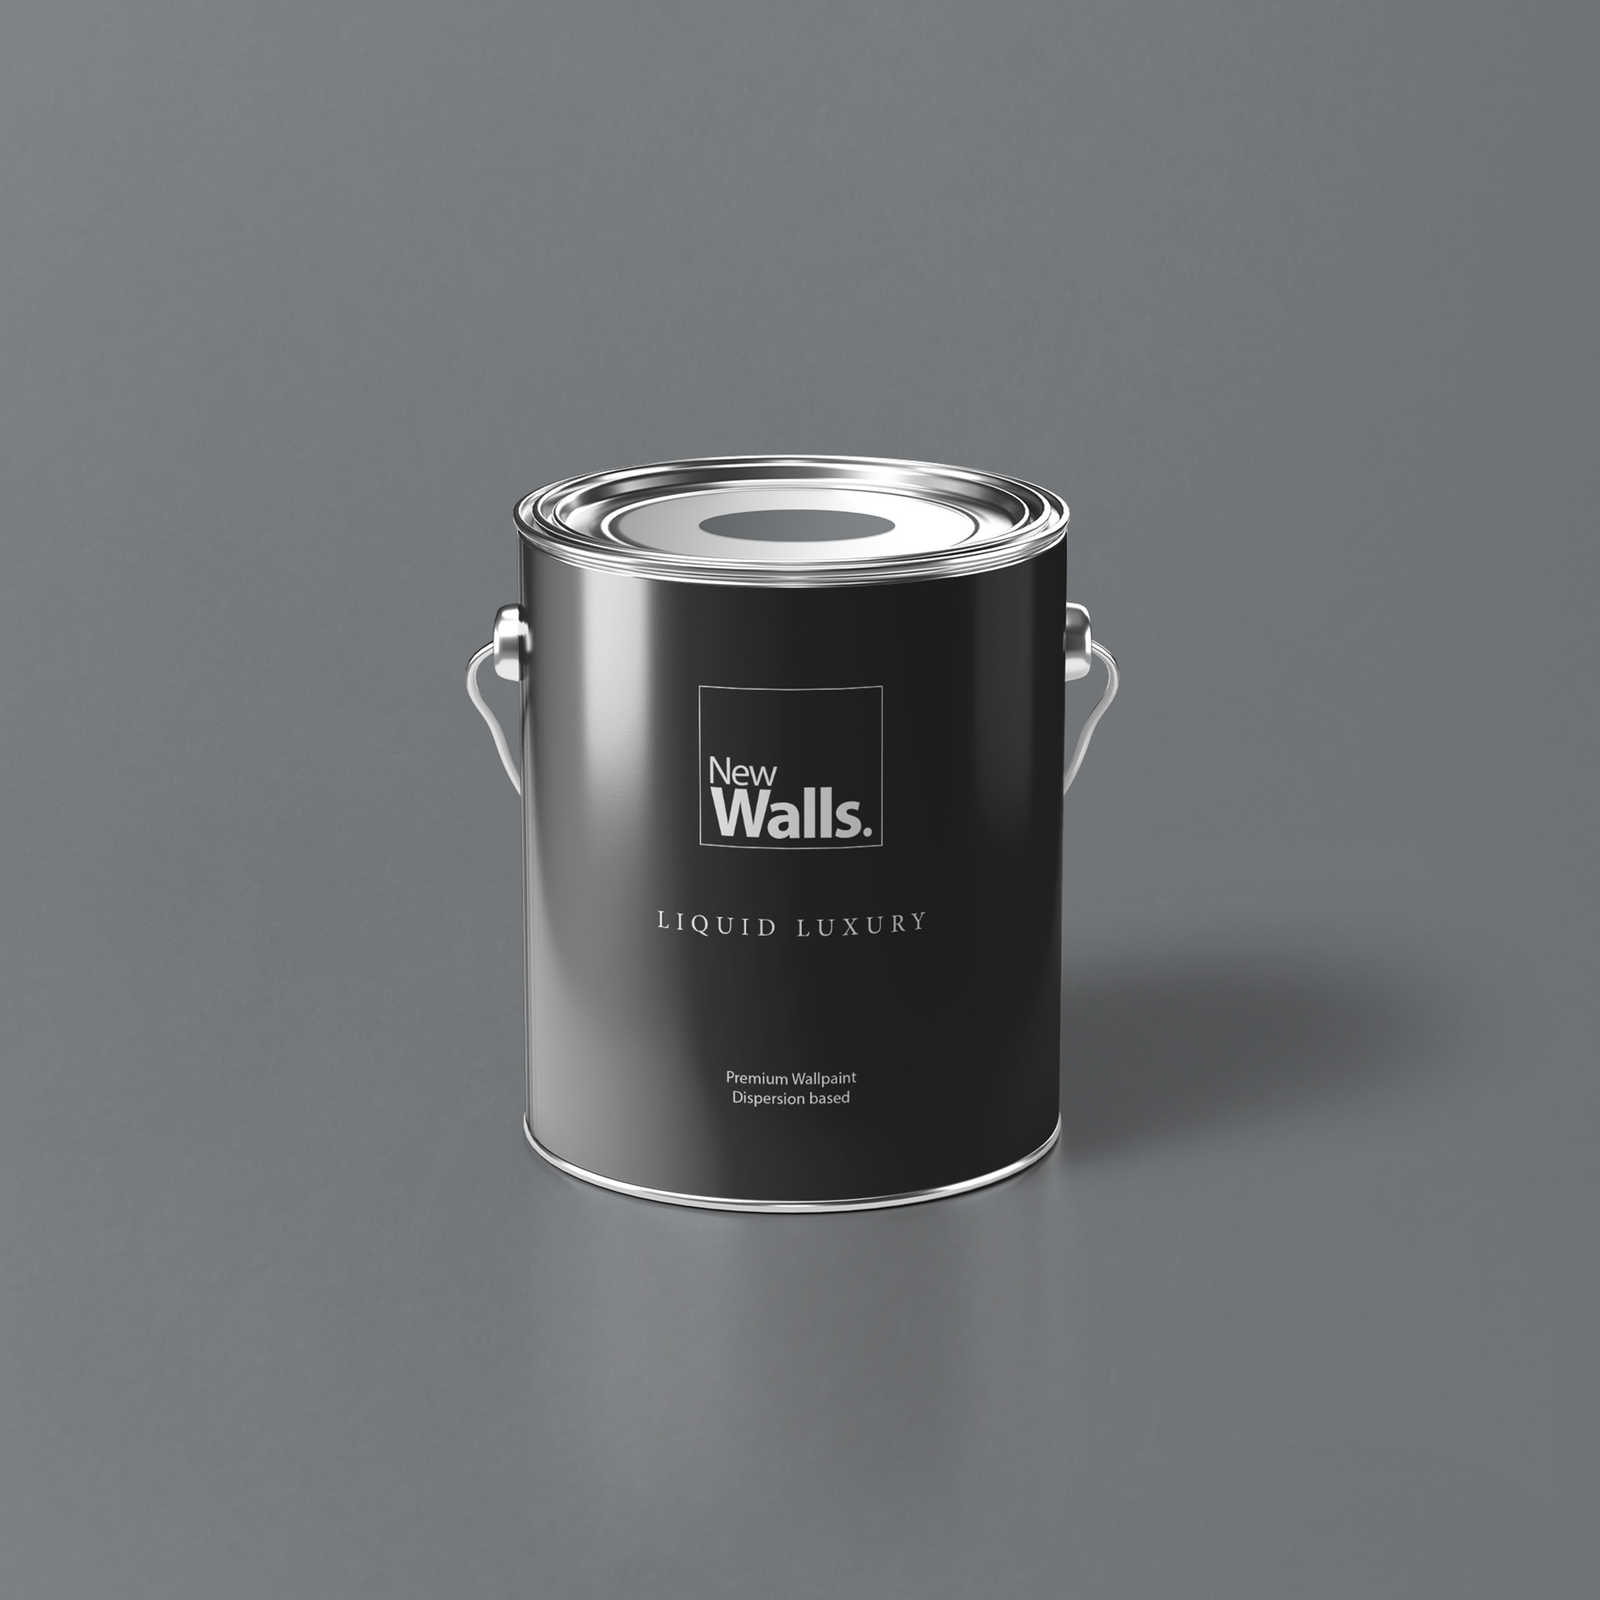 Premium Wall Paint Soothing Concrete Grey »Industrial Grey« NW104 – 2.5 litre
